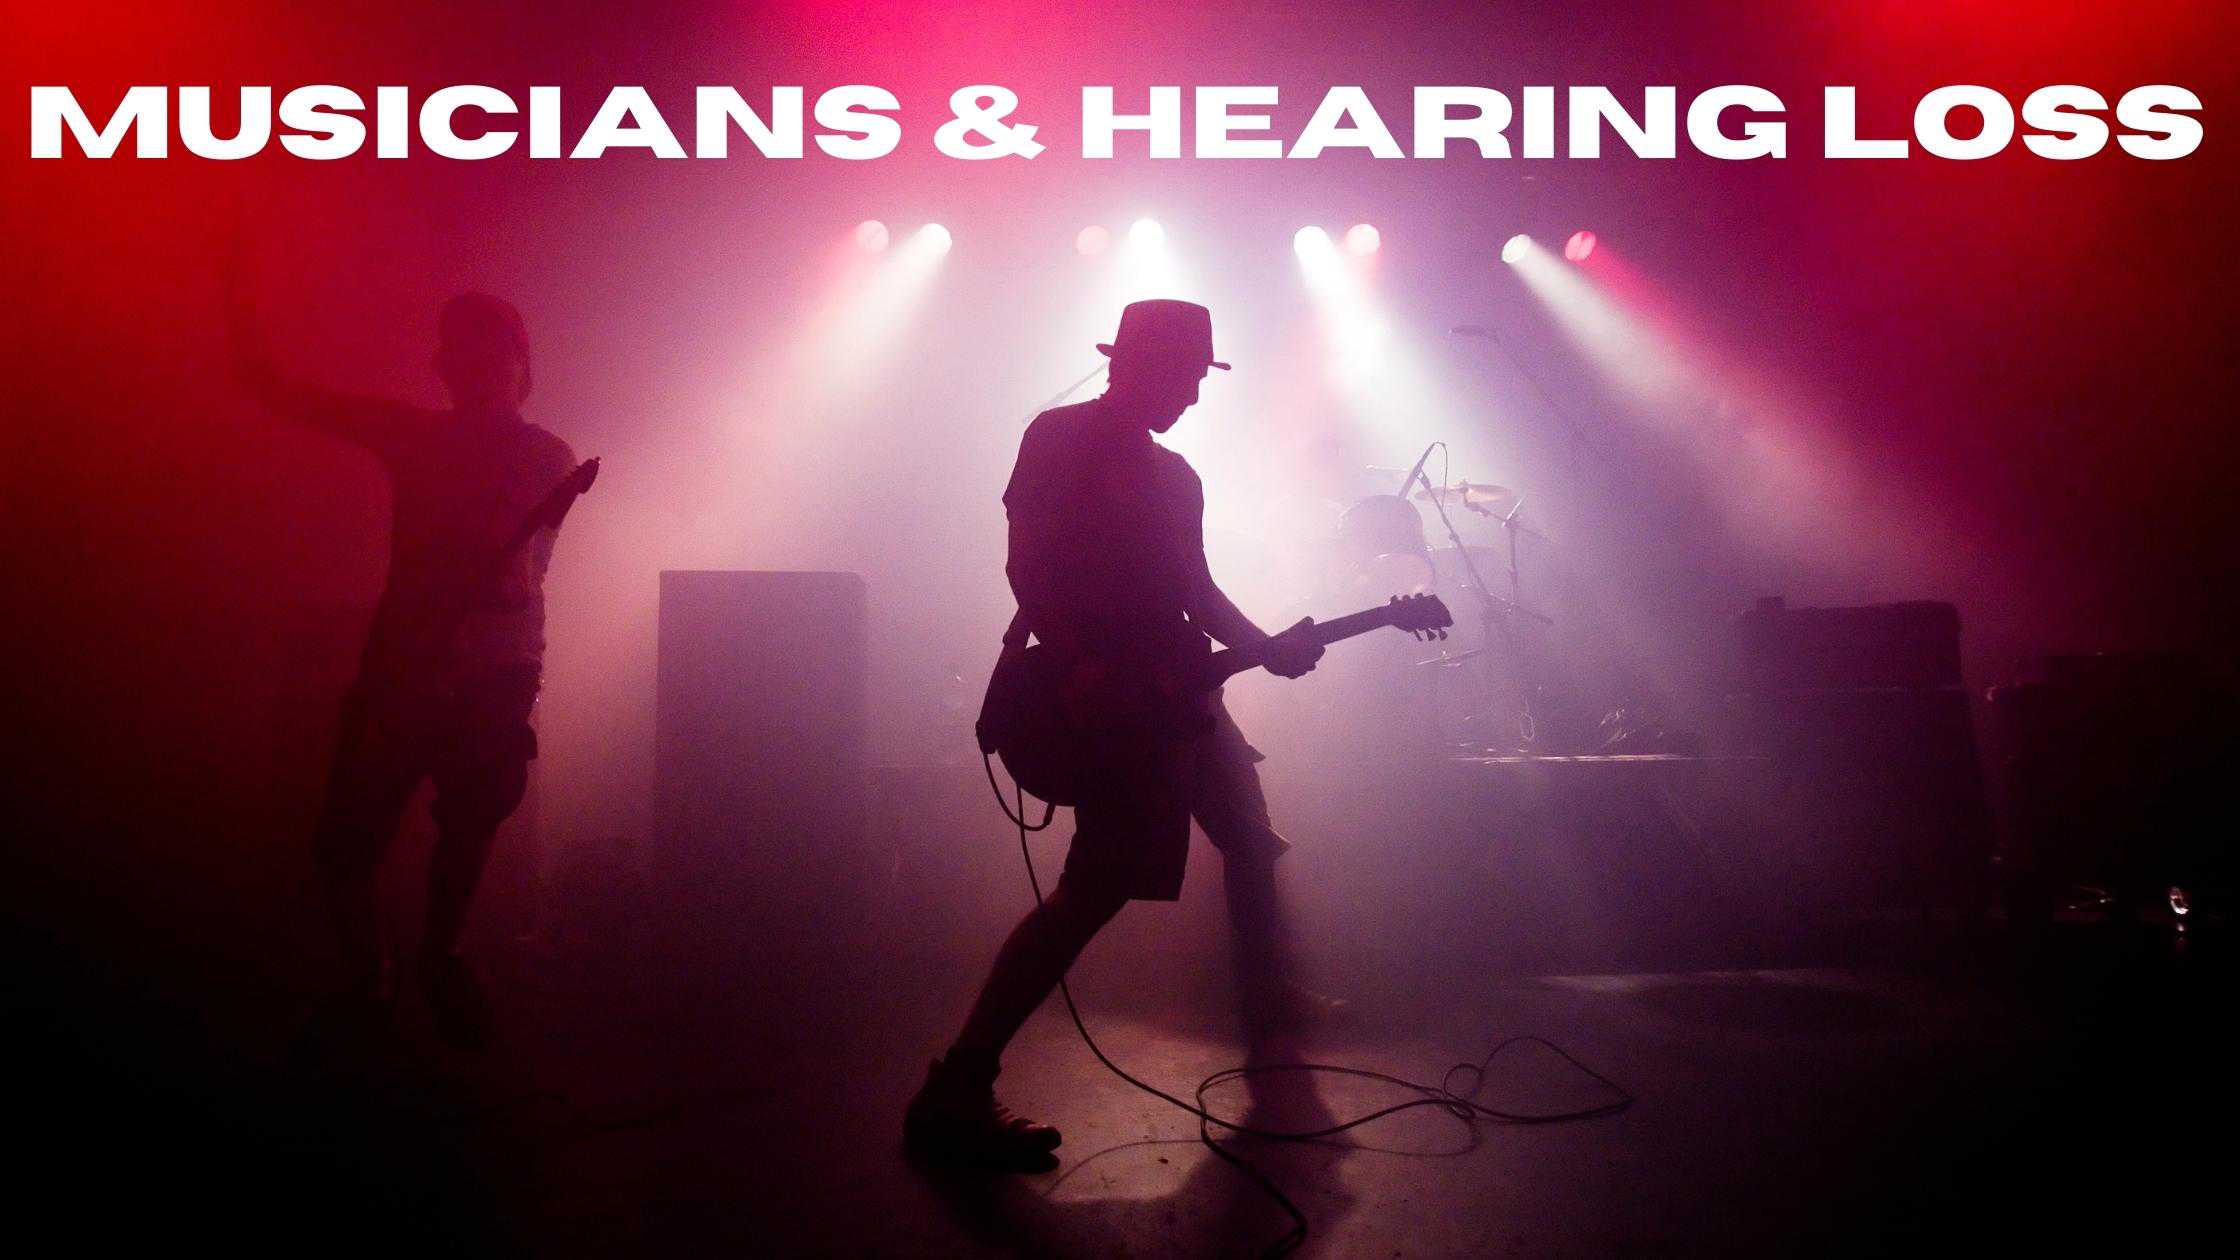 Featured image for “Musicians & Hearing Loss”